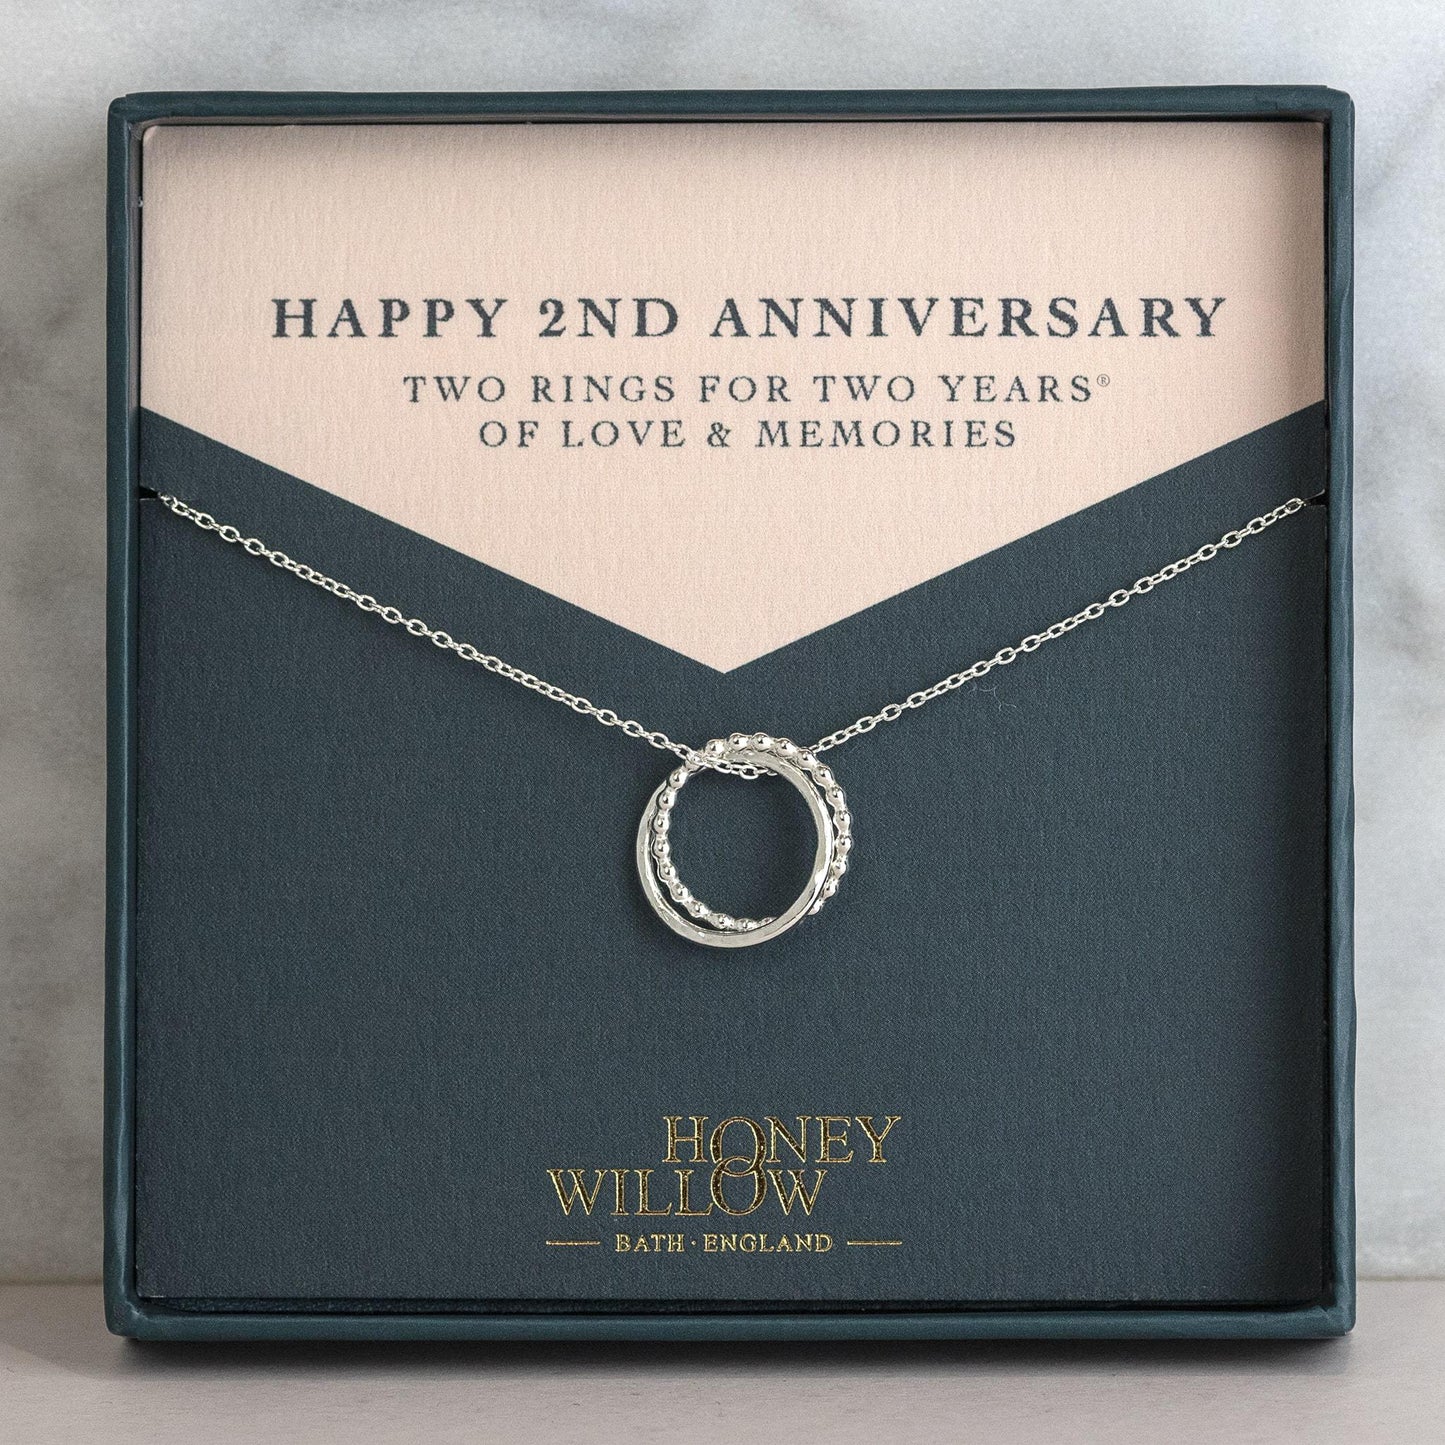 2nd Anniversary Necklace - Petite Silver - The Original 2 Rings for 2 Years® Necklace